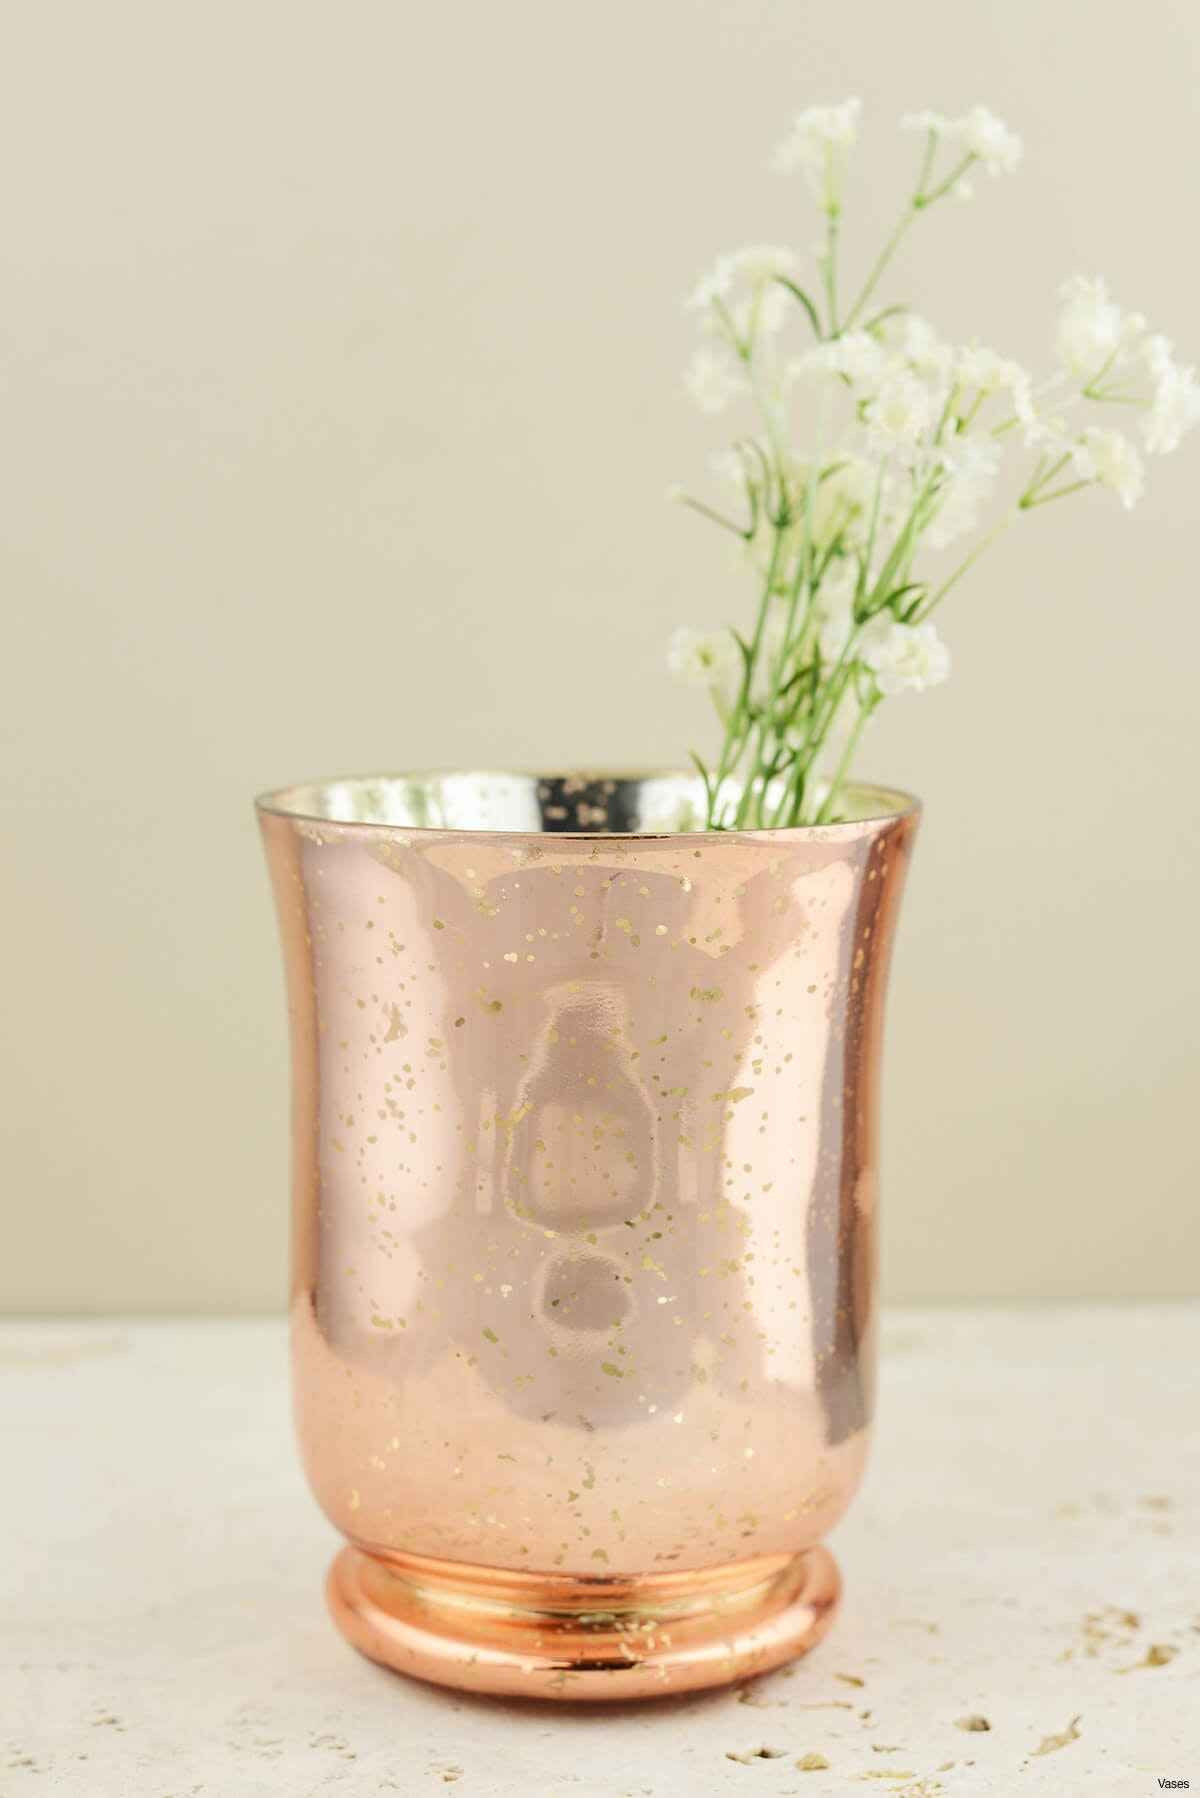 25 Unique 9 Inch Glass Vase 2024 free download 9 inch glass vase of 34 gold mercury glass vases the weekly world intended for gold mercury glass vases awesome 50 fresh collection candle holders rose gold of gold mercury glass vases